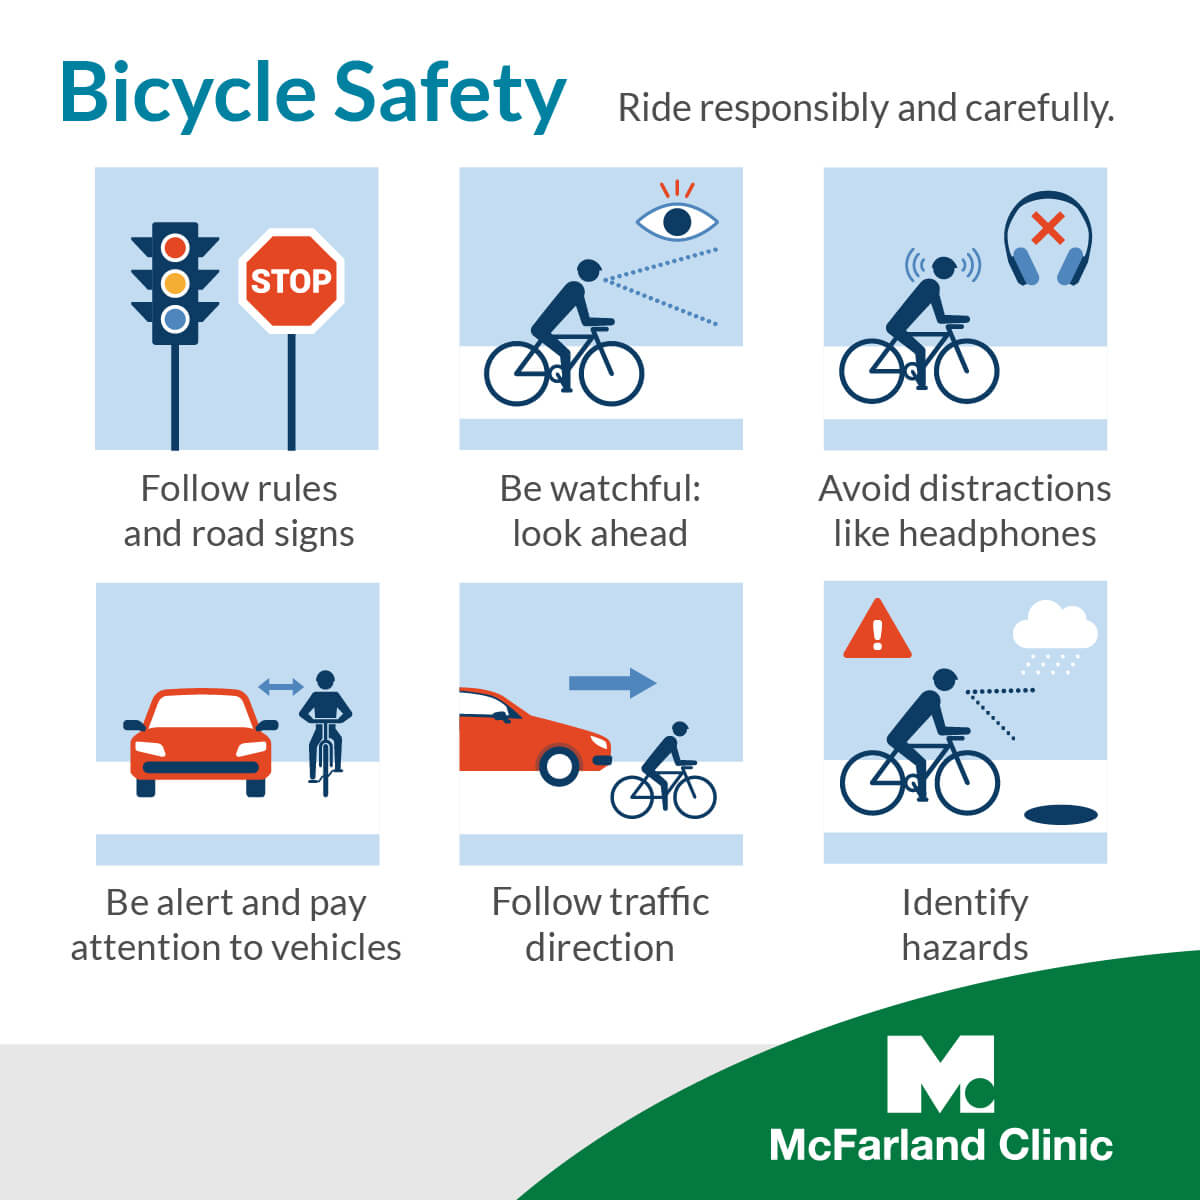 bicycle safety infographic - tips